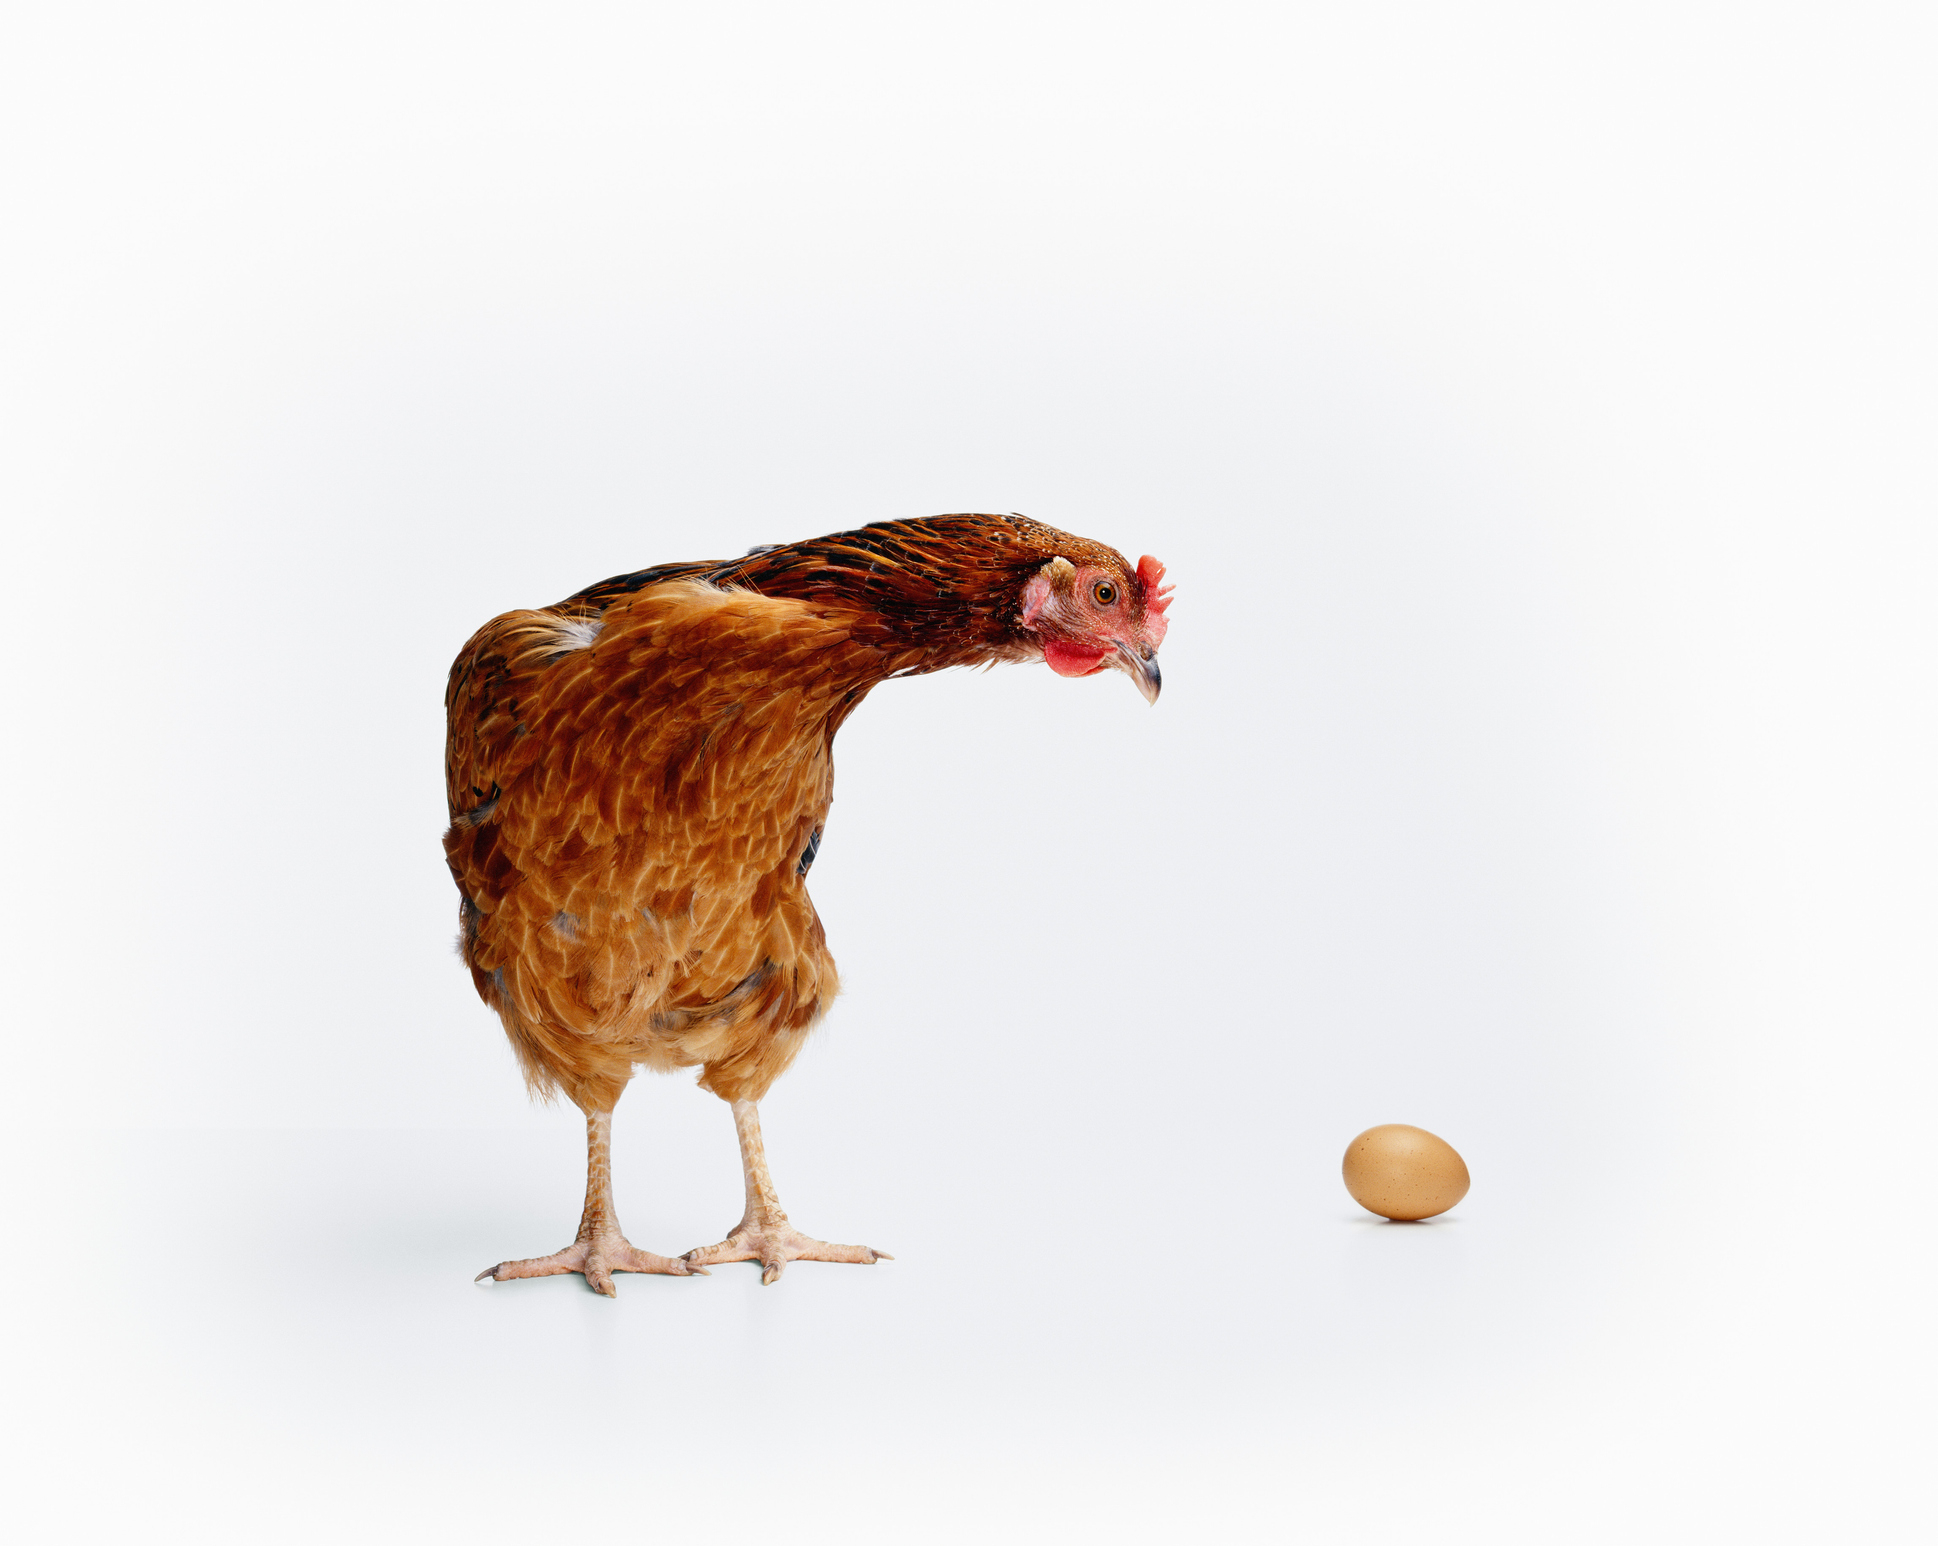 Chicken standing beside an egg against a white background